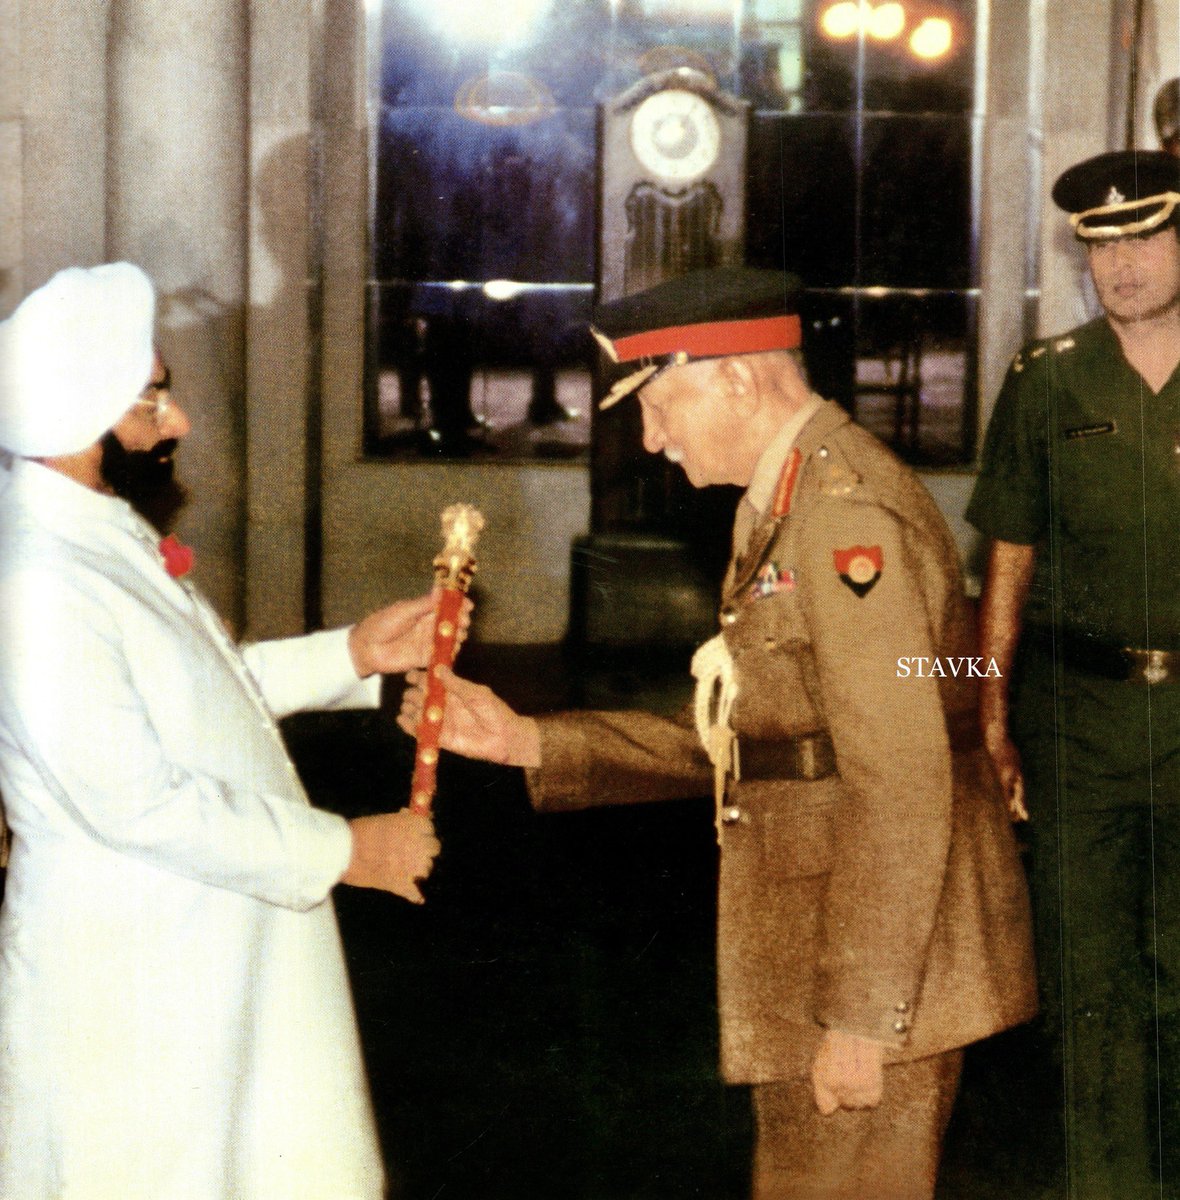 On 28 April 1986, in the Ashoka Hall of Rashtrapati Bhavan, the 87-year-old General Kodandera Madappa Cariappa was invested with the rank of Field Marshal and presented the baton by President Giani Zail Singh. The book titled Field Marshal K.M. Cariappa written by his son, Air